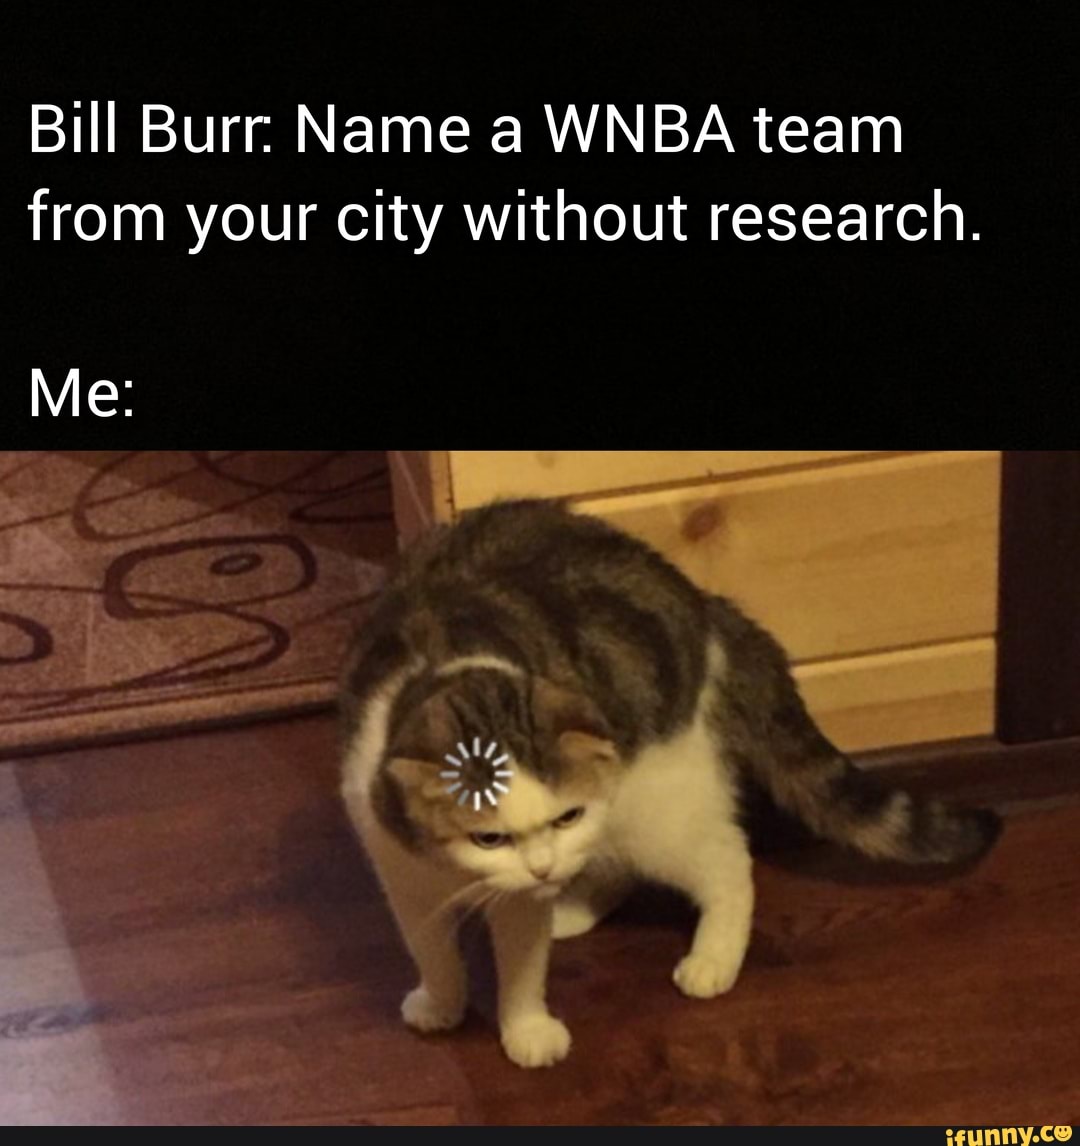 Bill Burr Name a WNBA team from your city without research